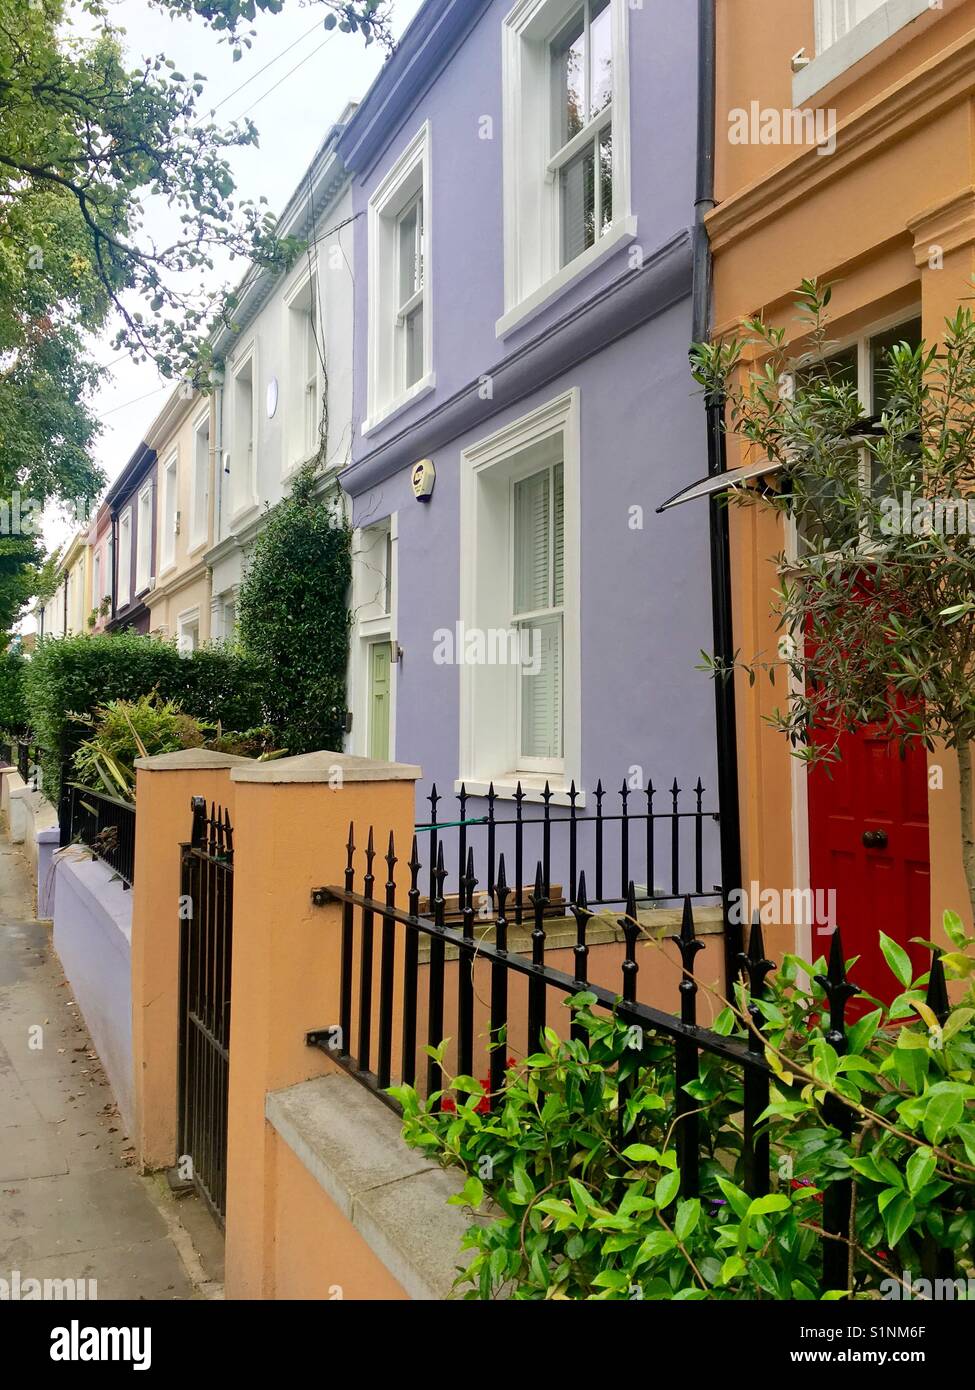 Row of colourful houses in Notting Hill, London Stock Photo